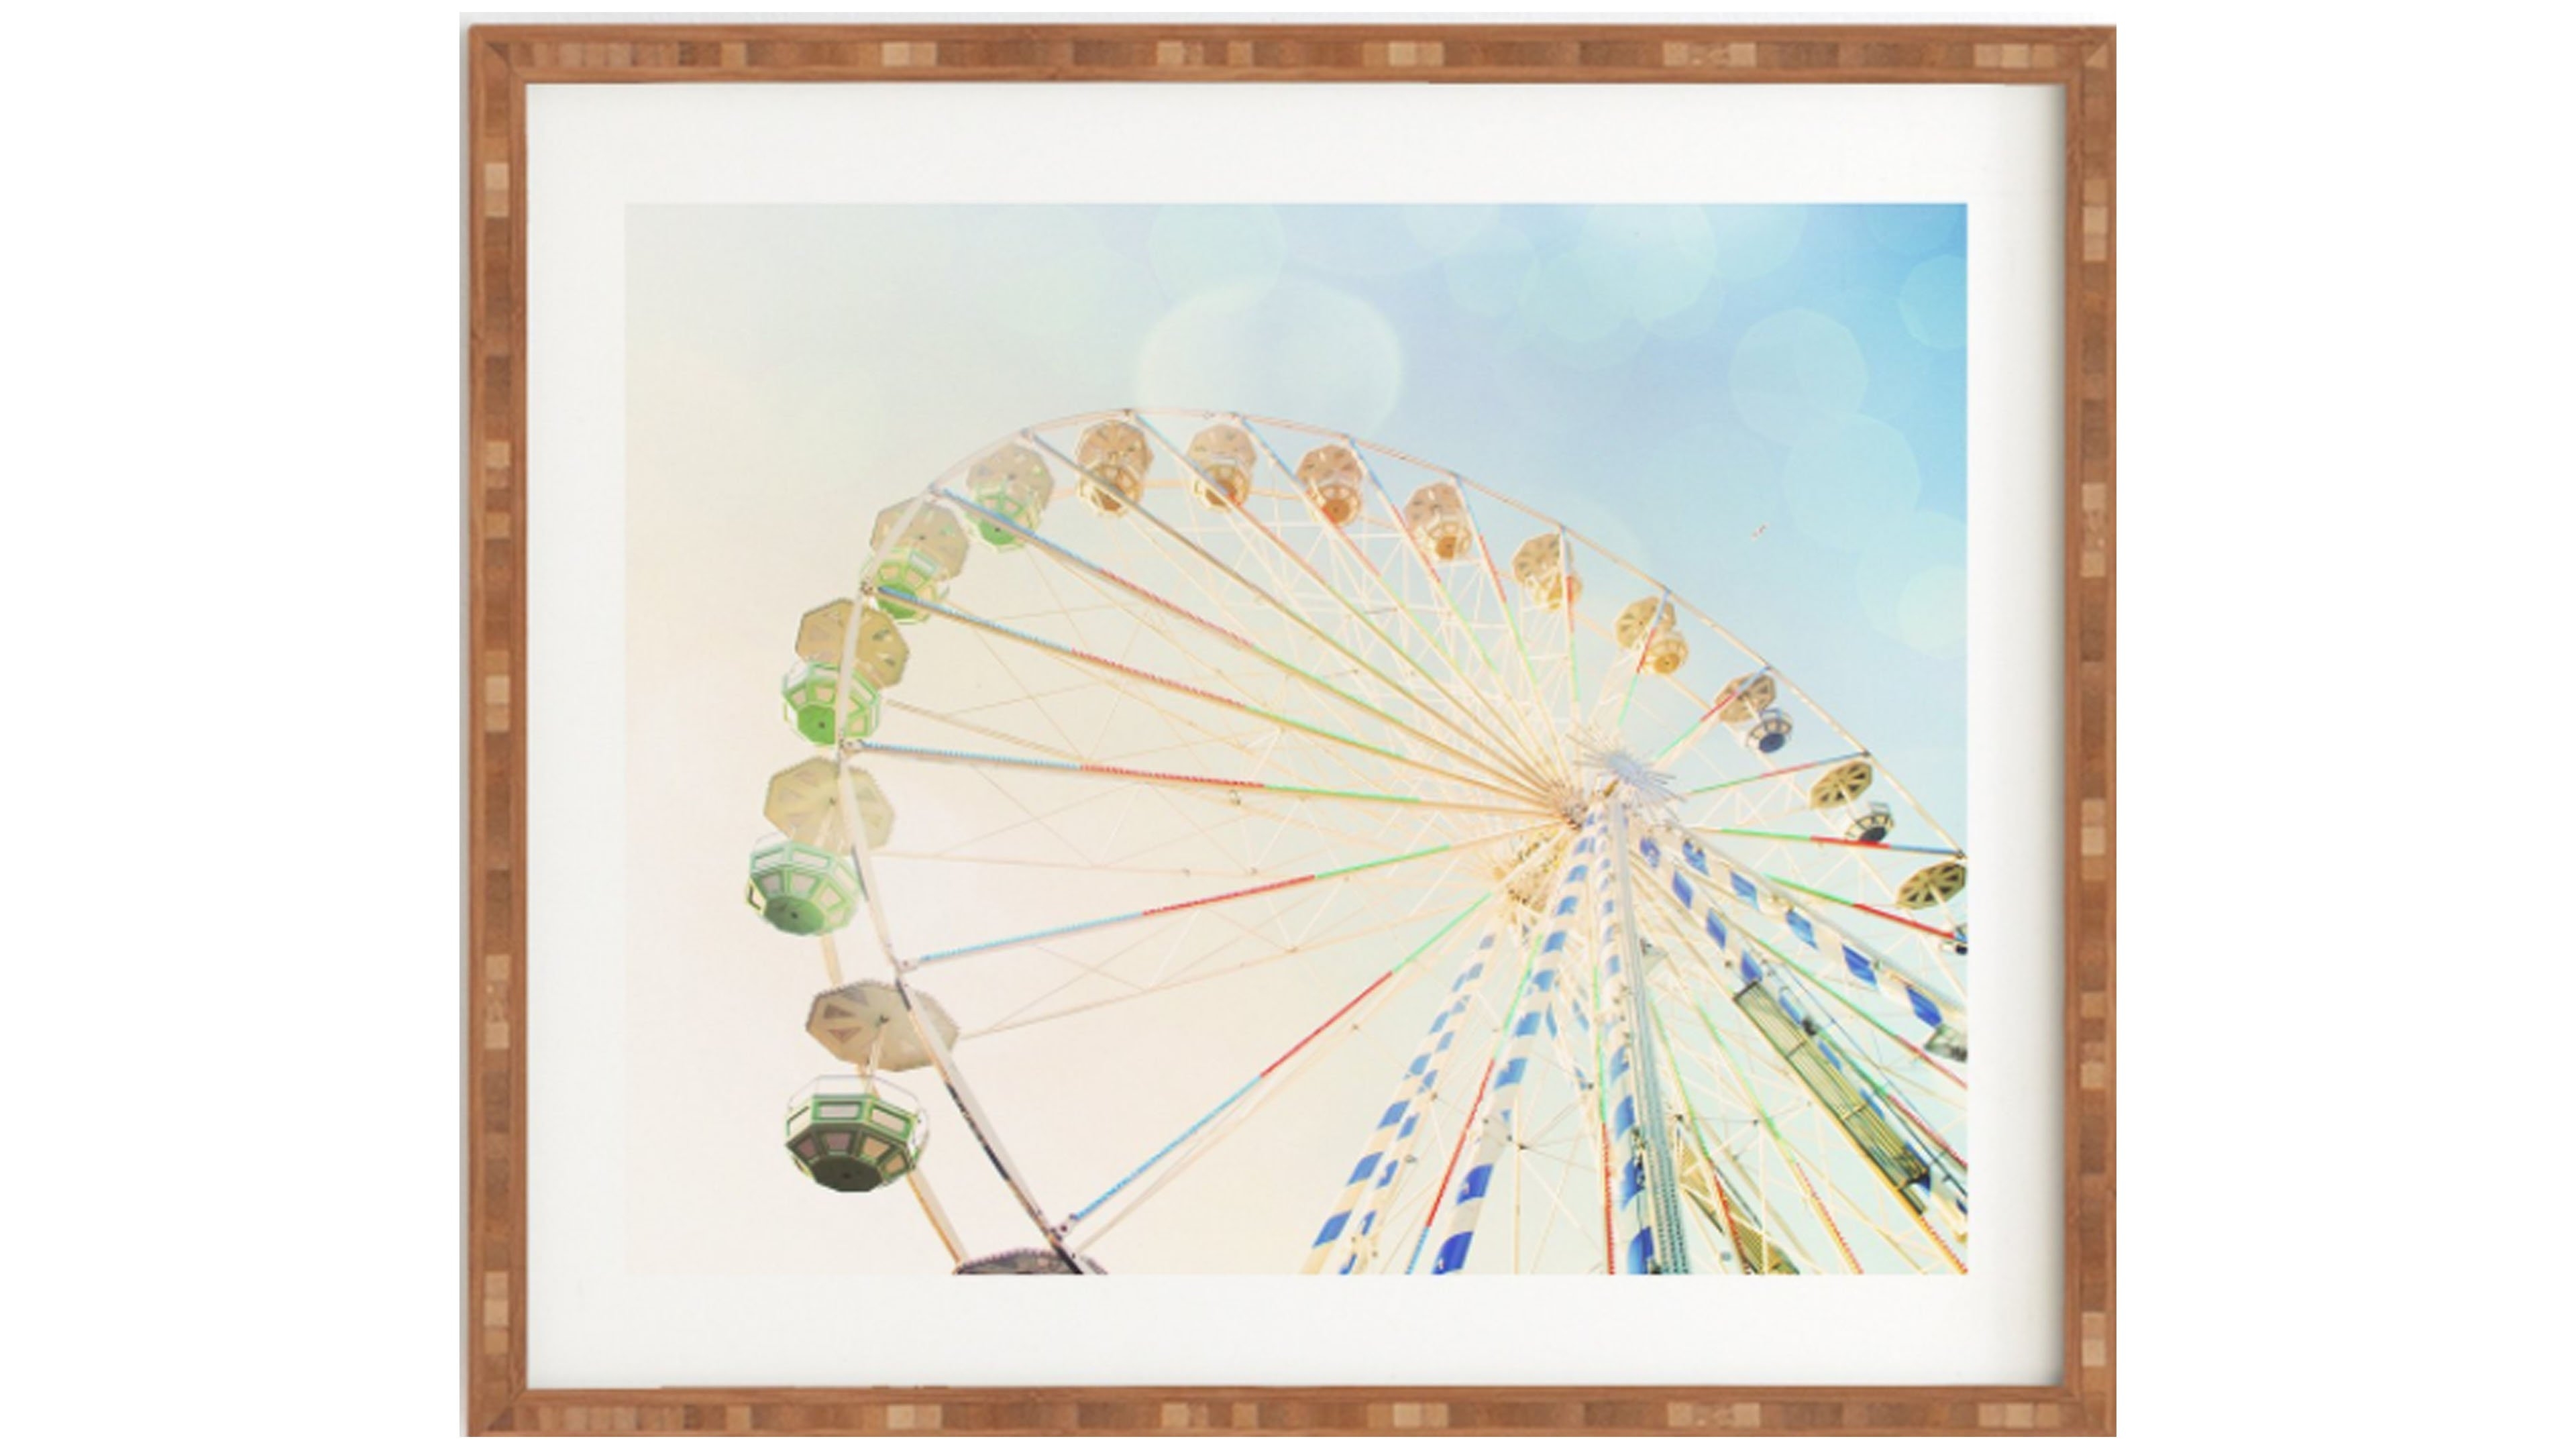 Ferris Wheel, Canvas, 24 x 30 canvas, not pictured. - Image 0